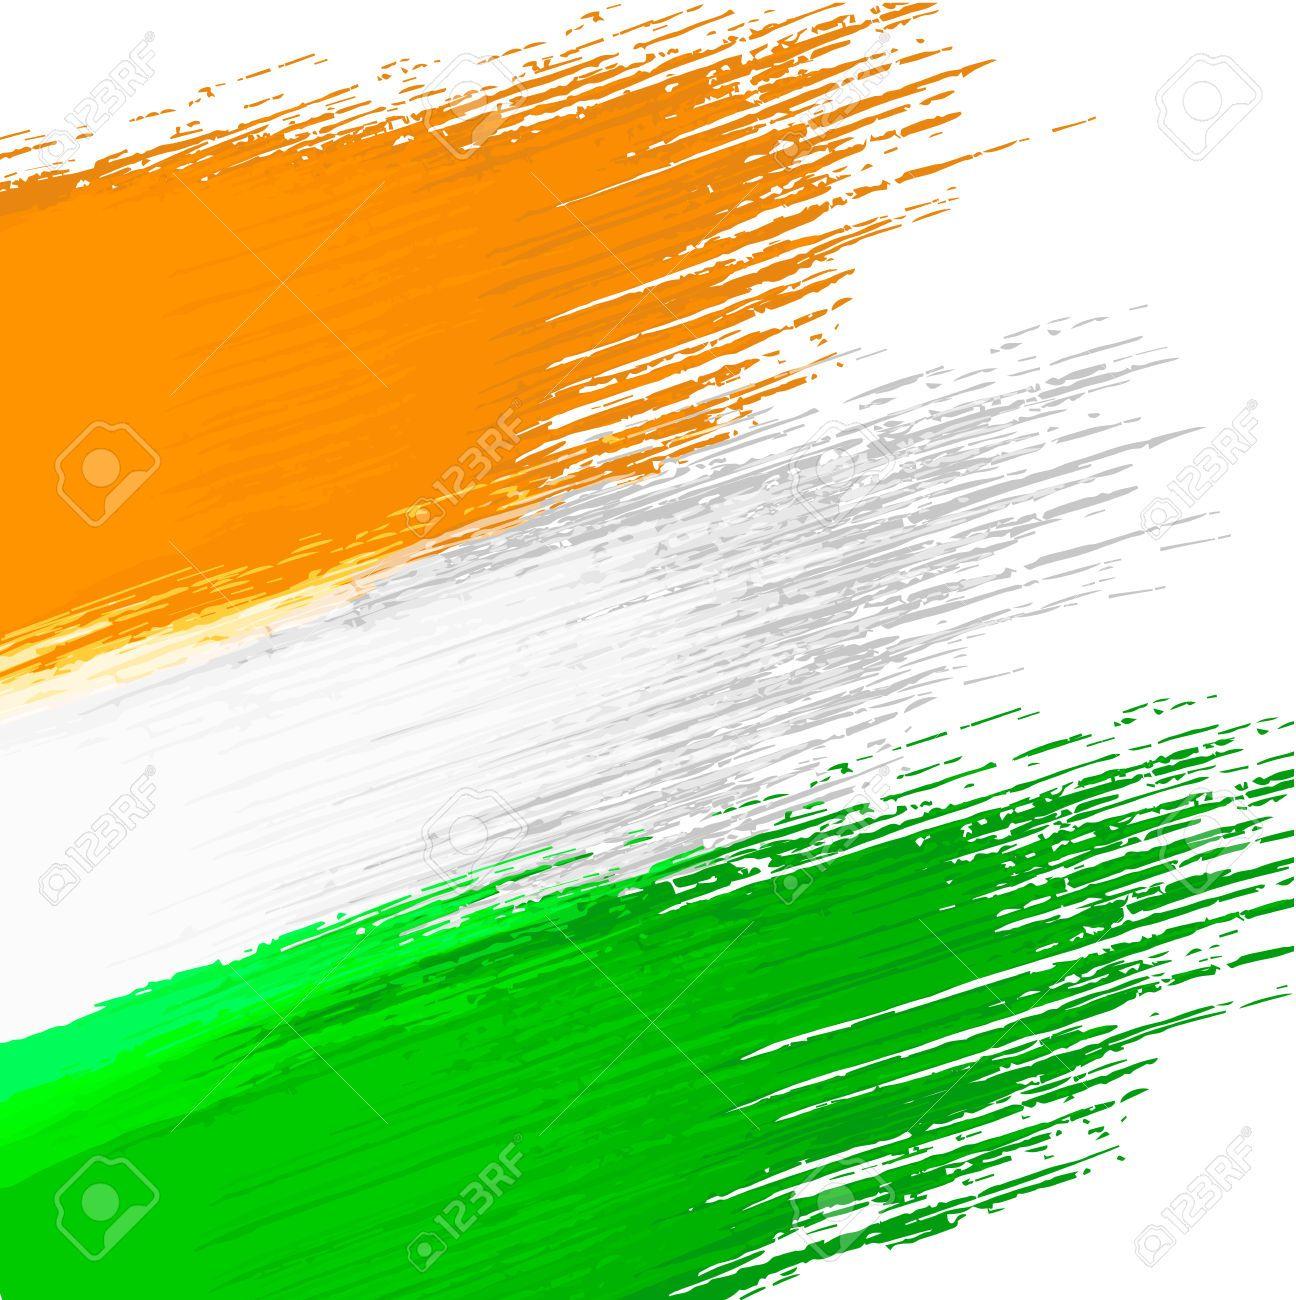 Grunge Background In Colors Of Indian Flag Royalty Free Clipart